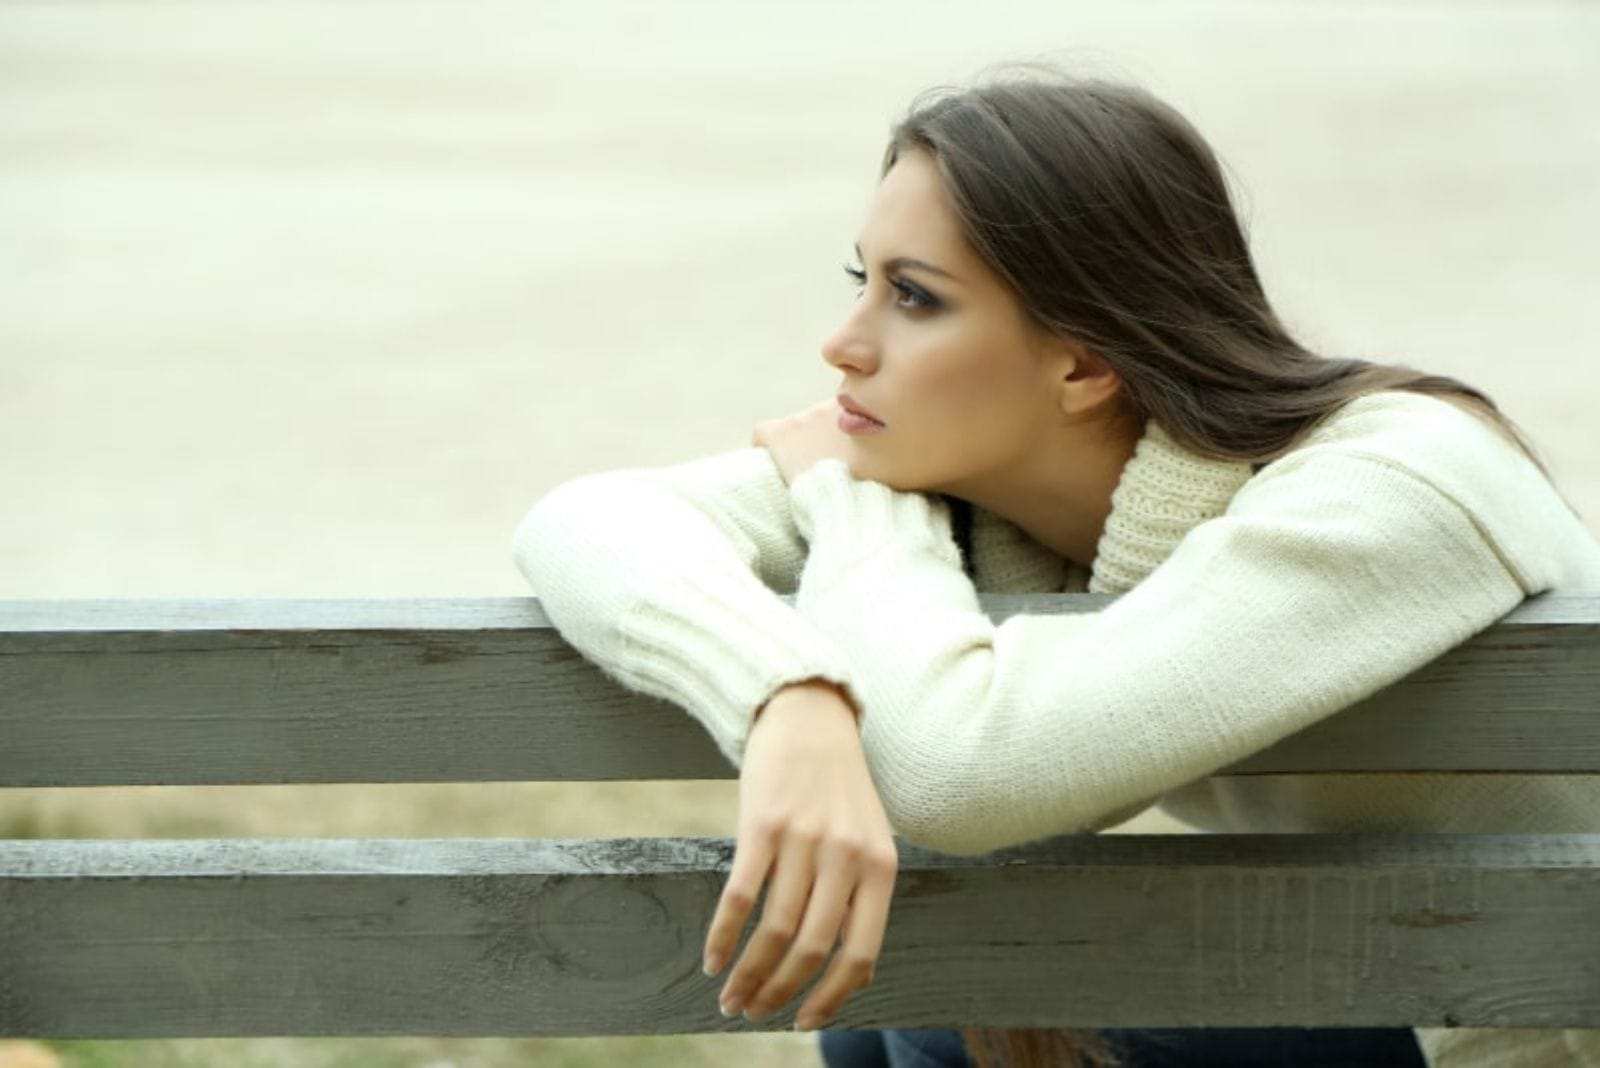 woman sitting on bench and feeling lonely in nature